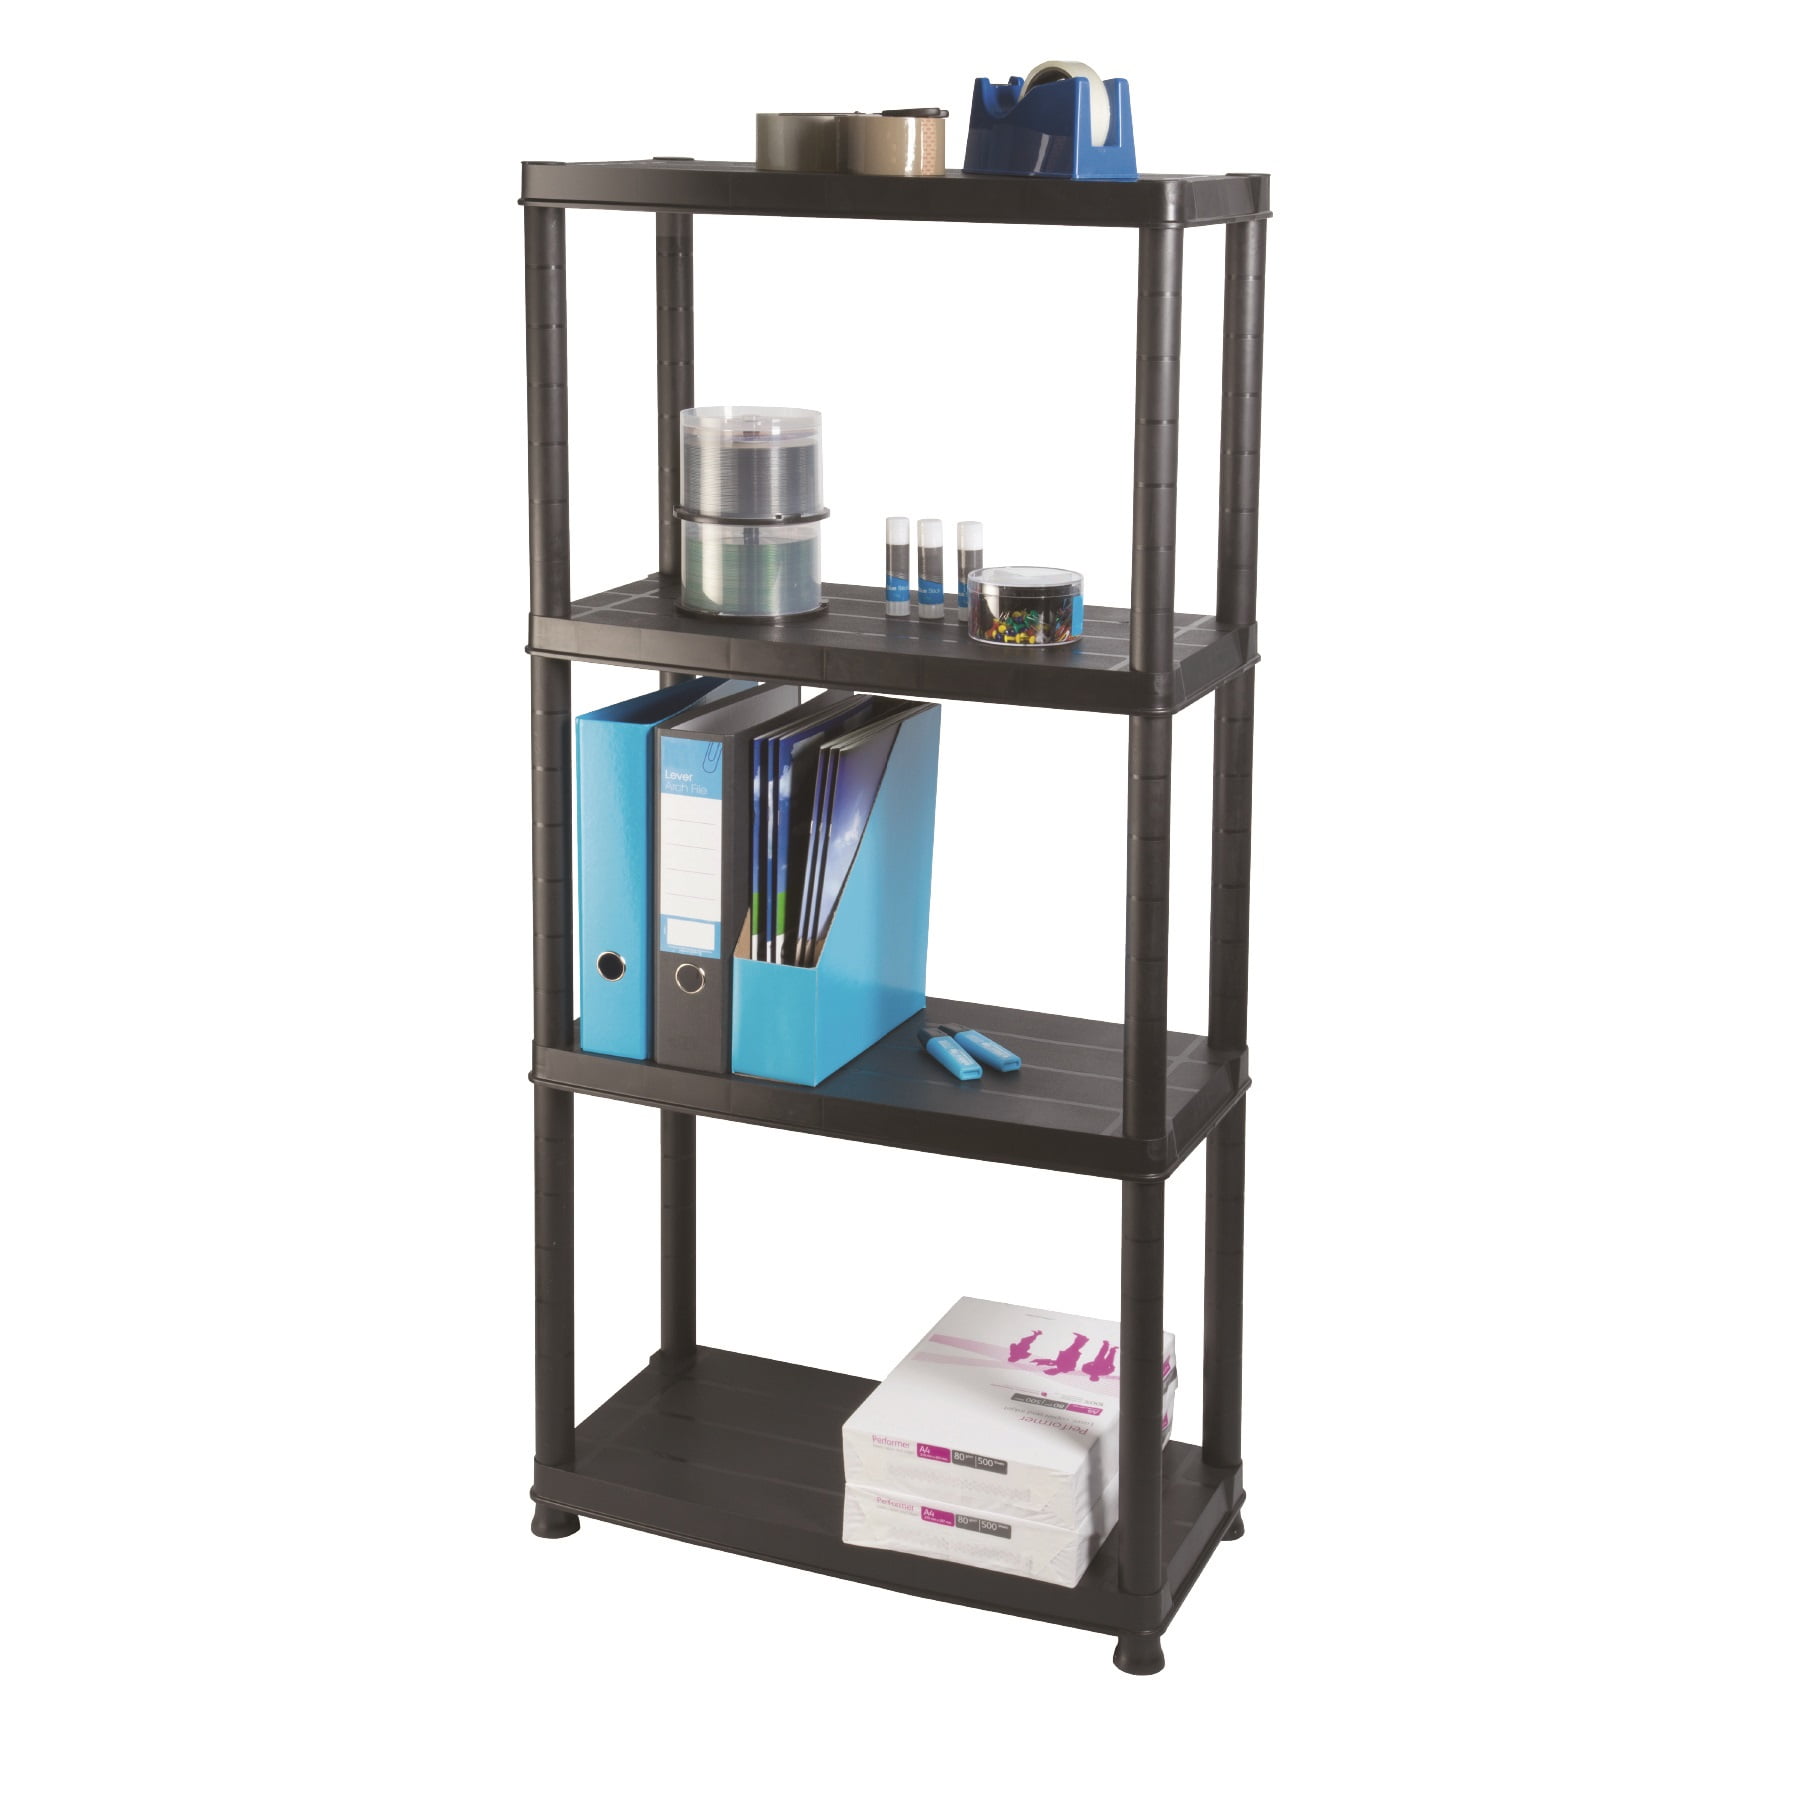 Ram Quality Products Primo 12 inch 4 Tier Plastic Storage Shelves Black 